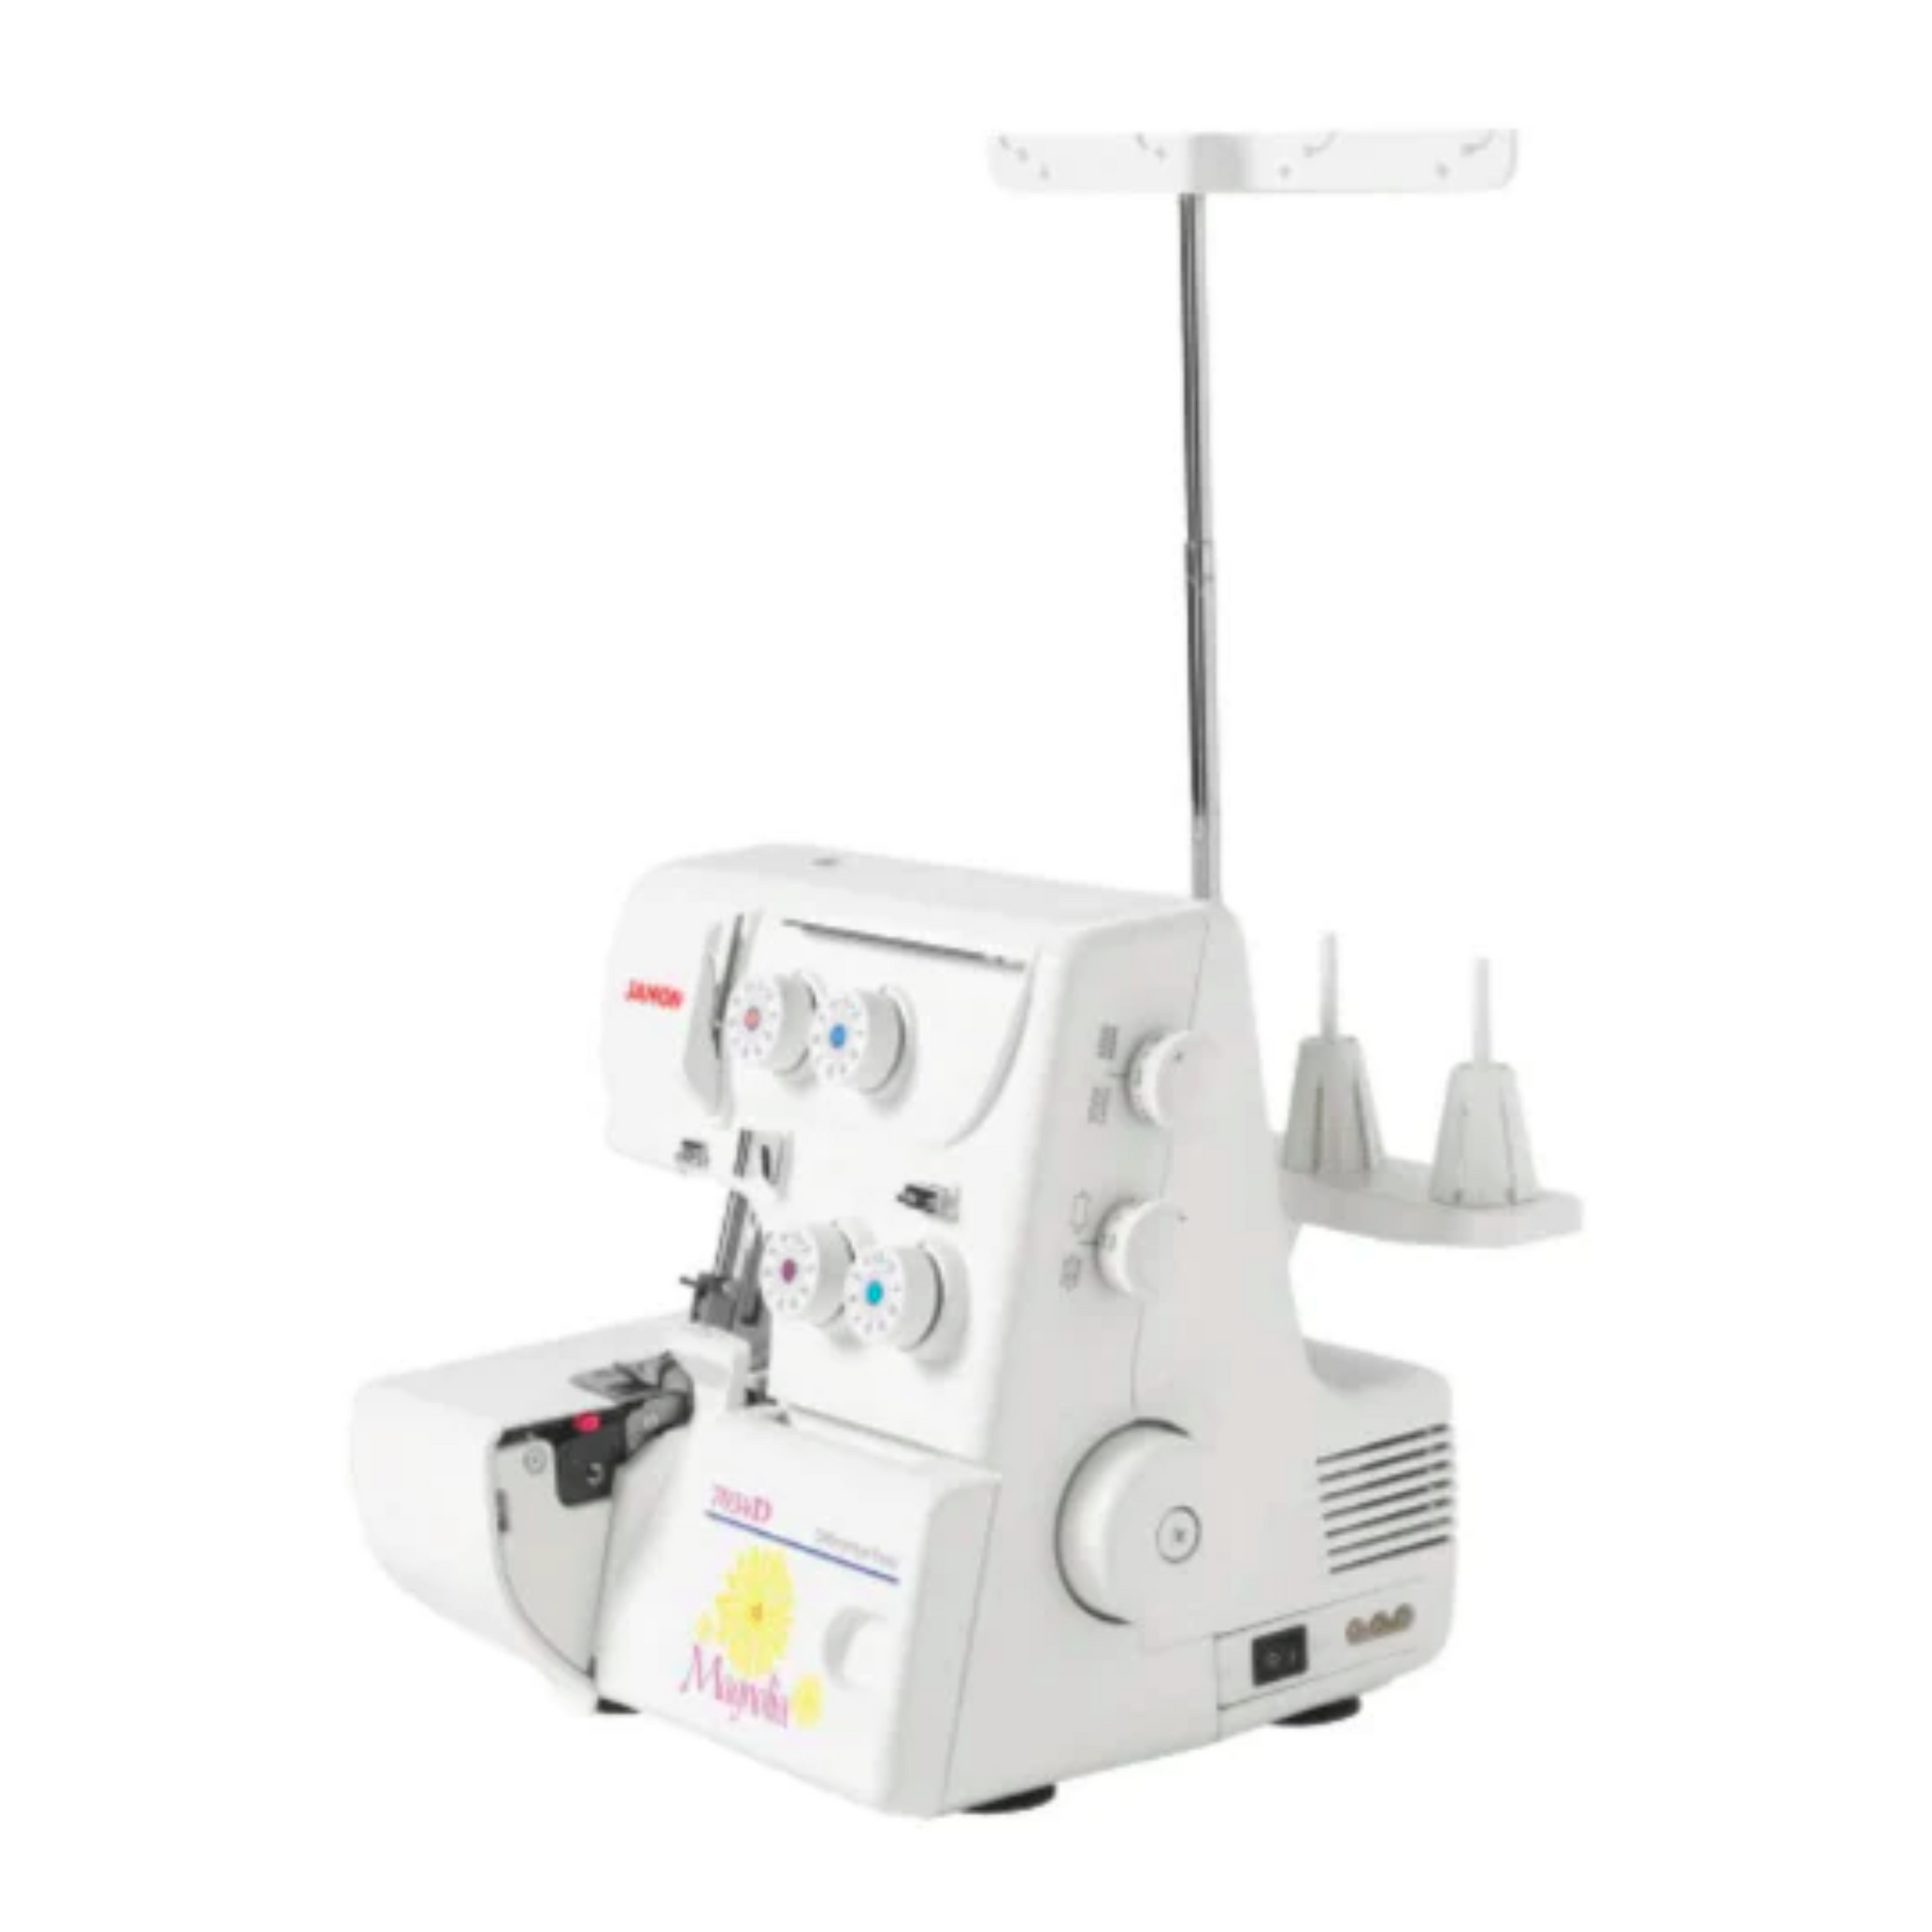 Janome 7034D magnolia serger - Sewing machine - White - Side view